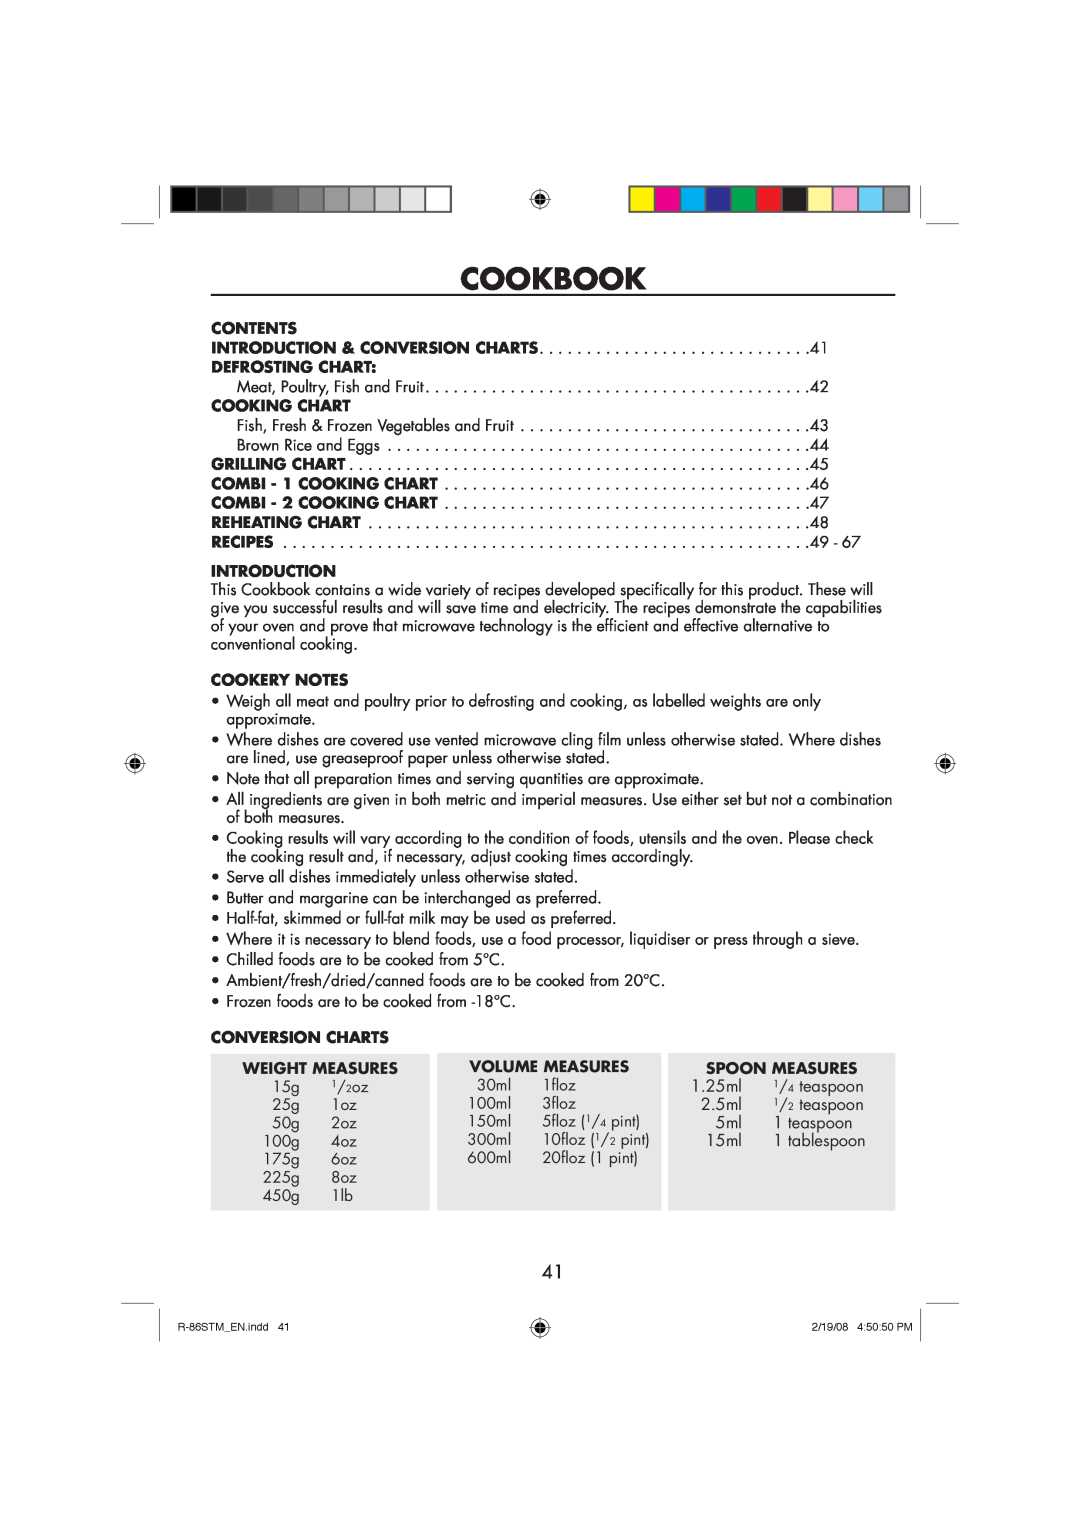 Sharp R-86STM manual Cookbook, Contents, Defrosting Chart, Cooking Chart, Introduction, Cookery Notes, Conversion Charts 